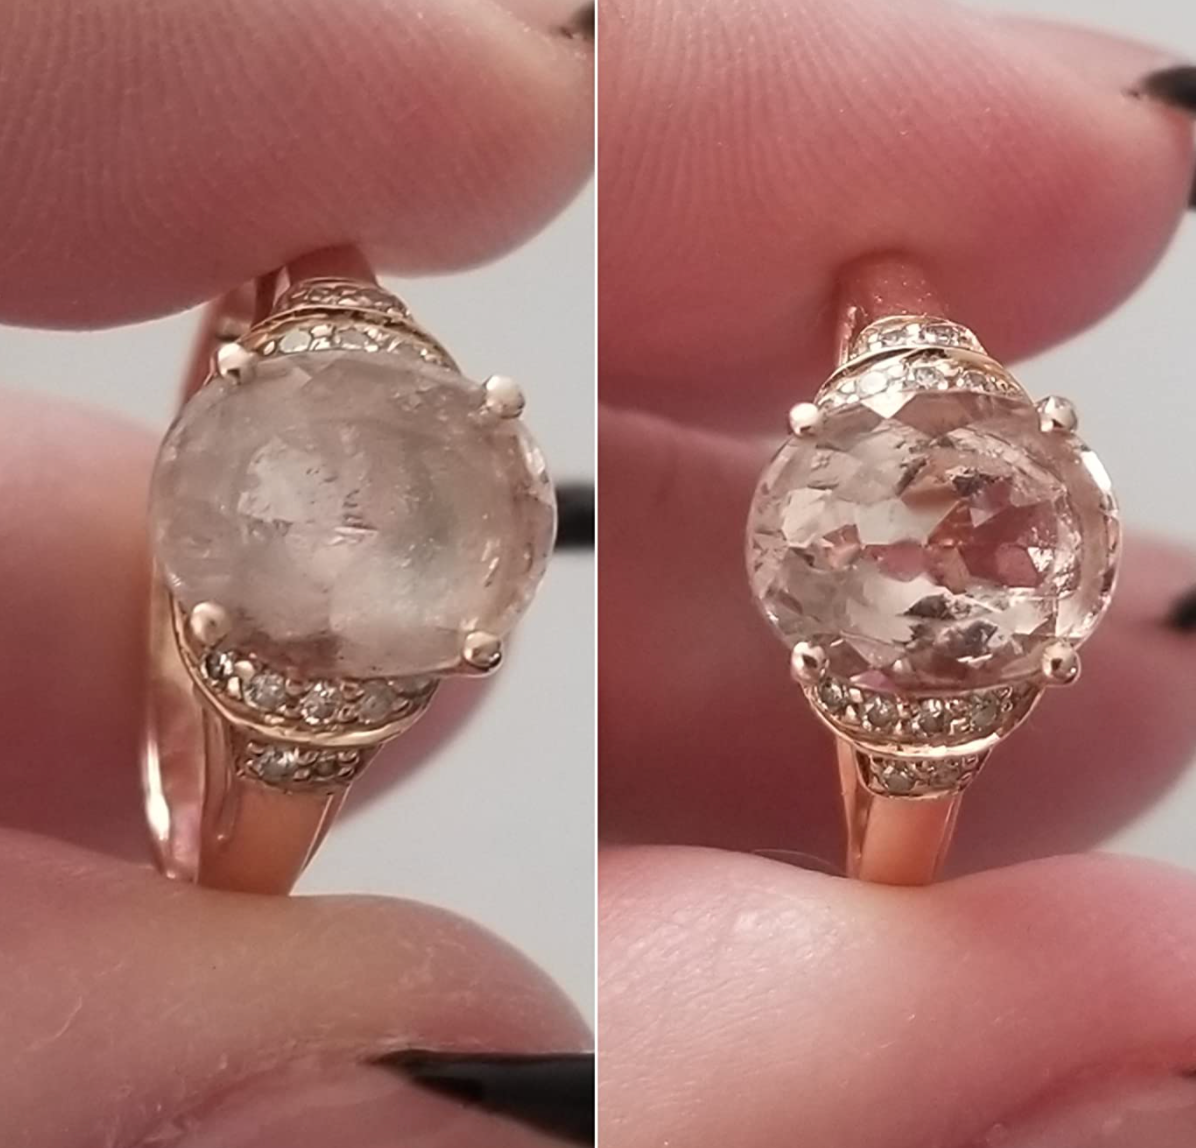 a before and after photo of a reviewer's diamond ring looking fogged up and then looking shiny and new after using the cleaning pen